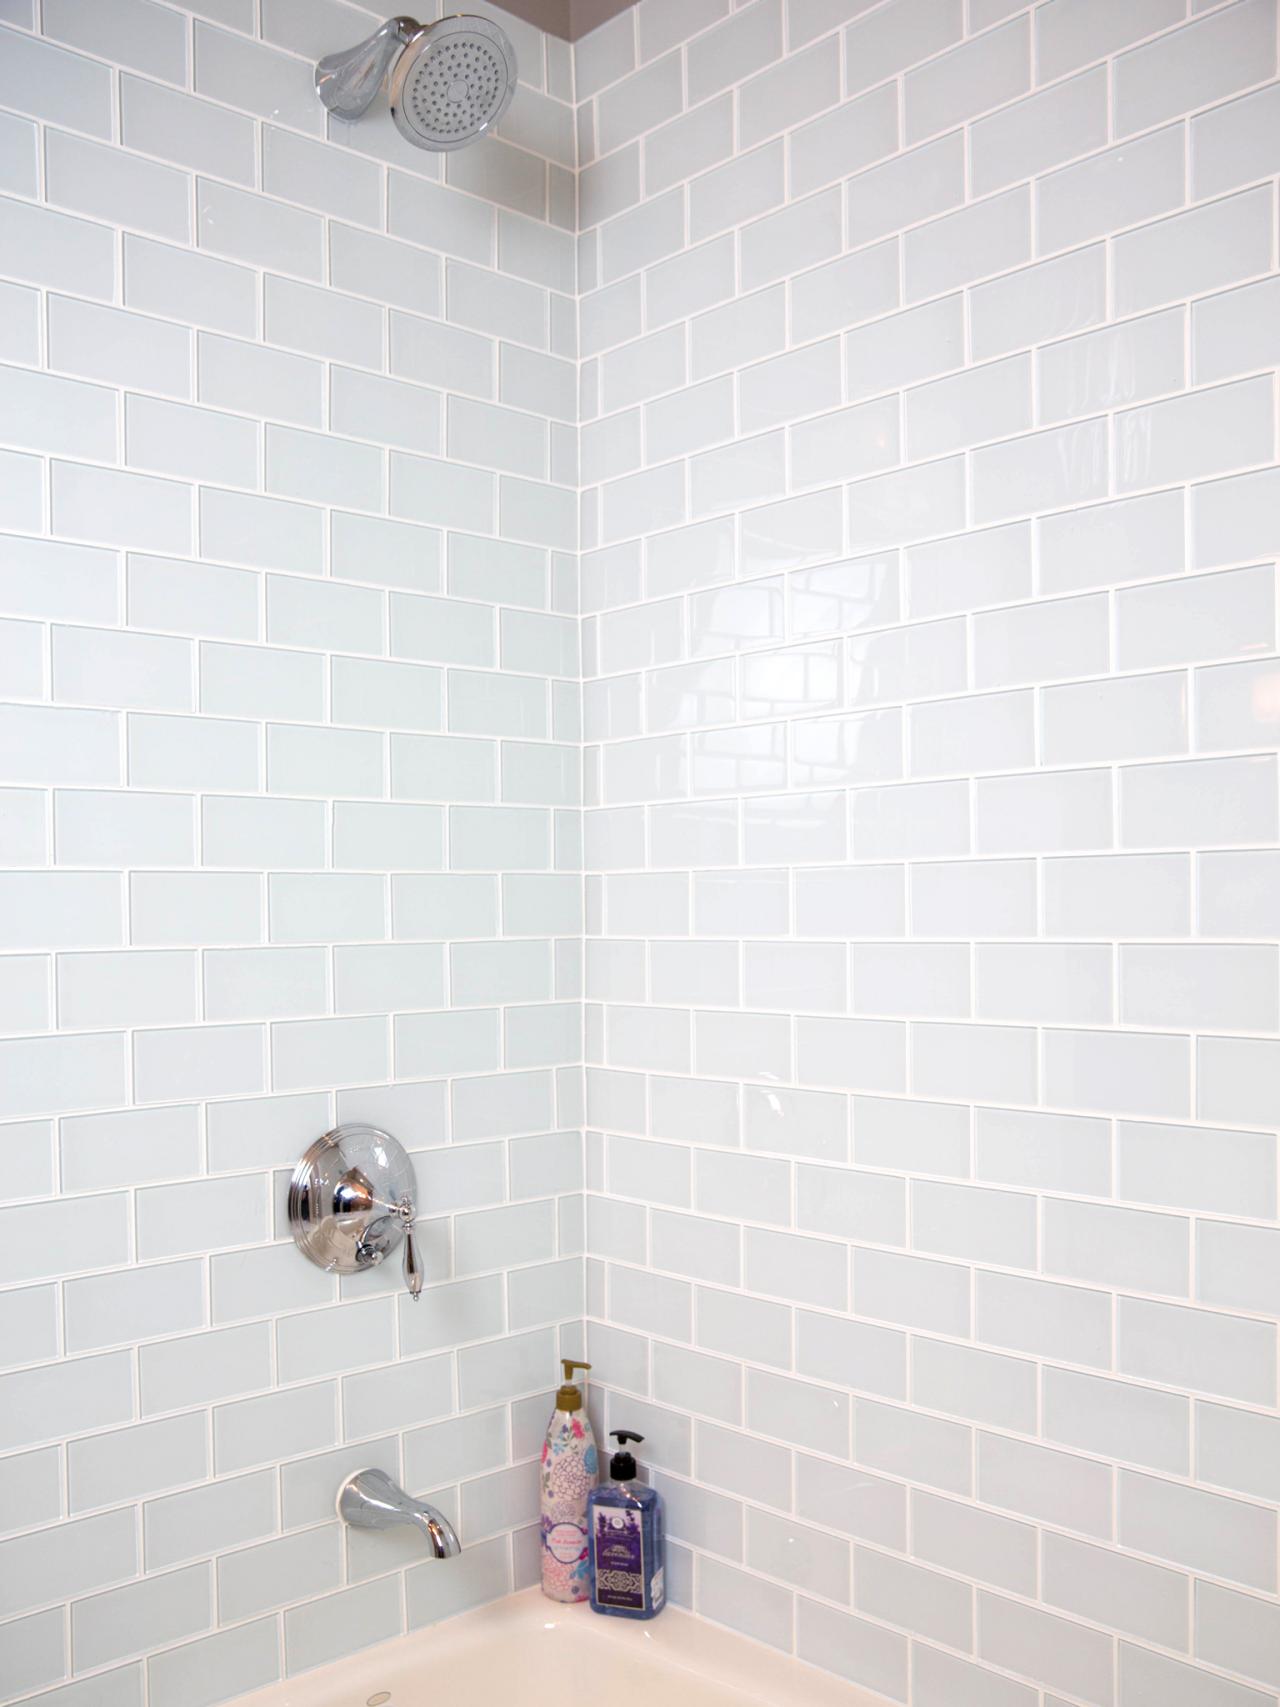 How To Install A Shower Tile Wall, How To Lay Tile On A Wall